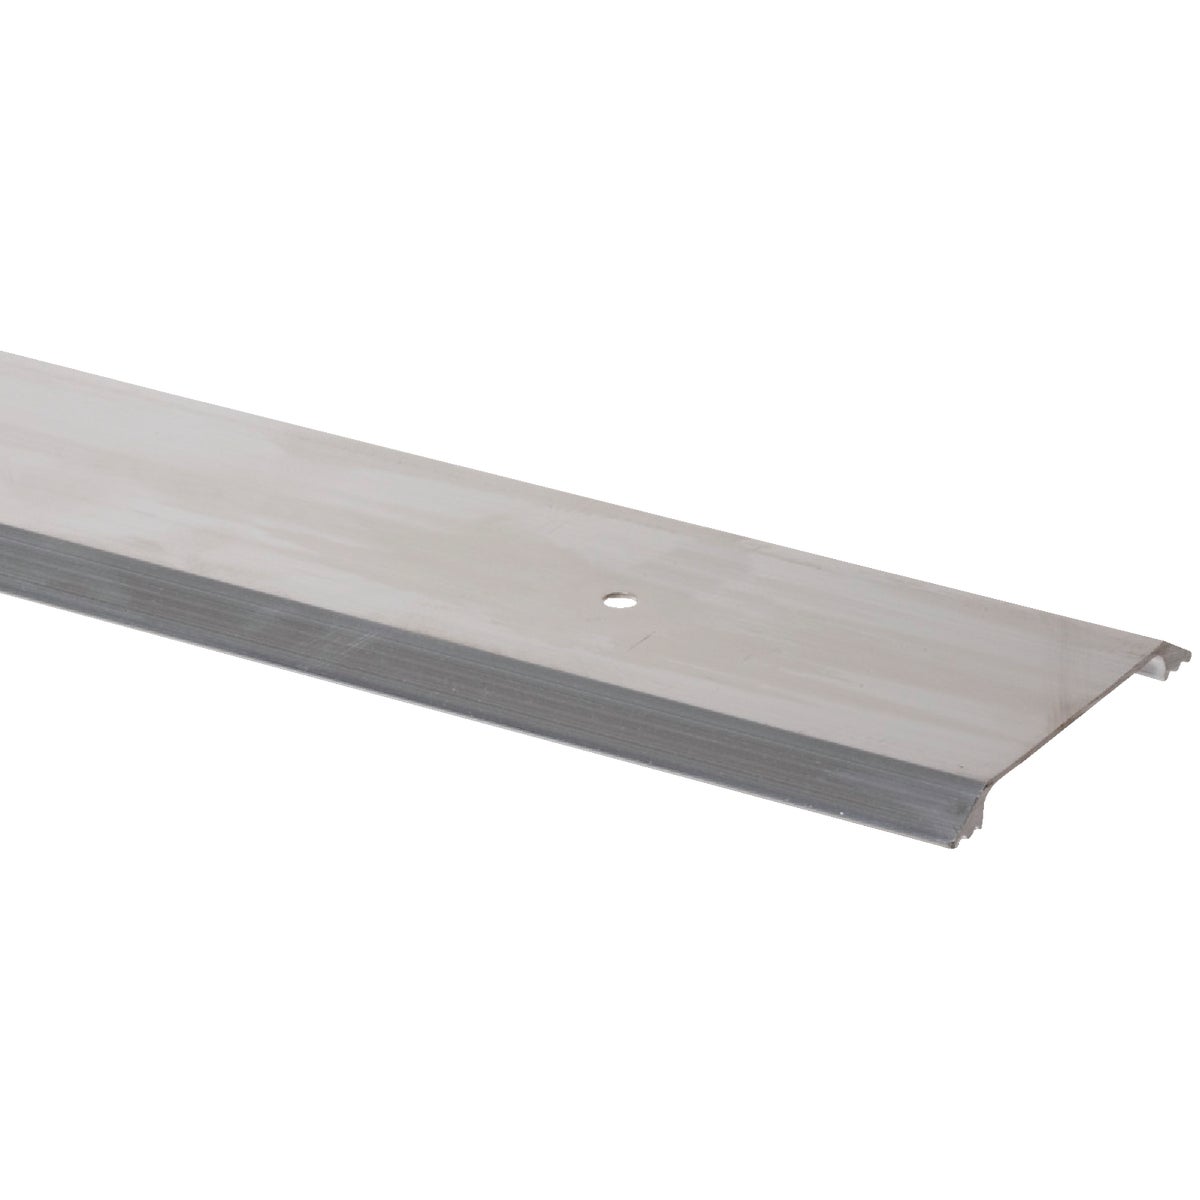 Item 272094, AFF212 series. Heavy-duty, extruded aluminum, smooth flat top threshold.